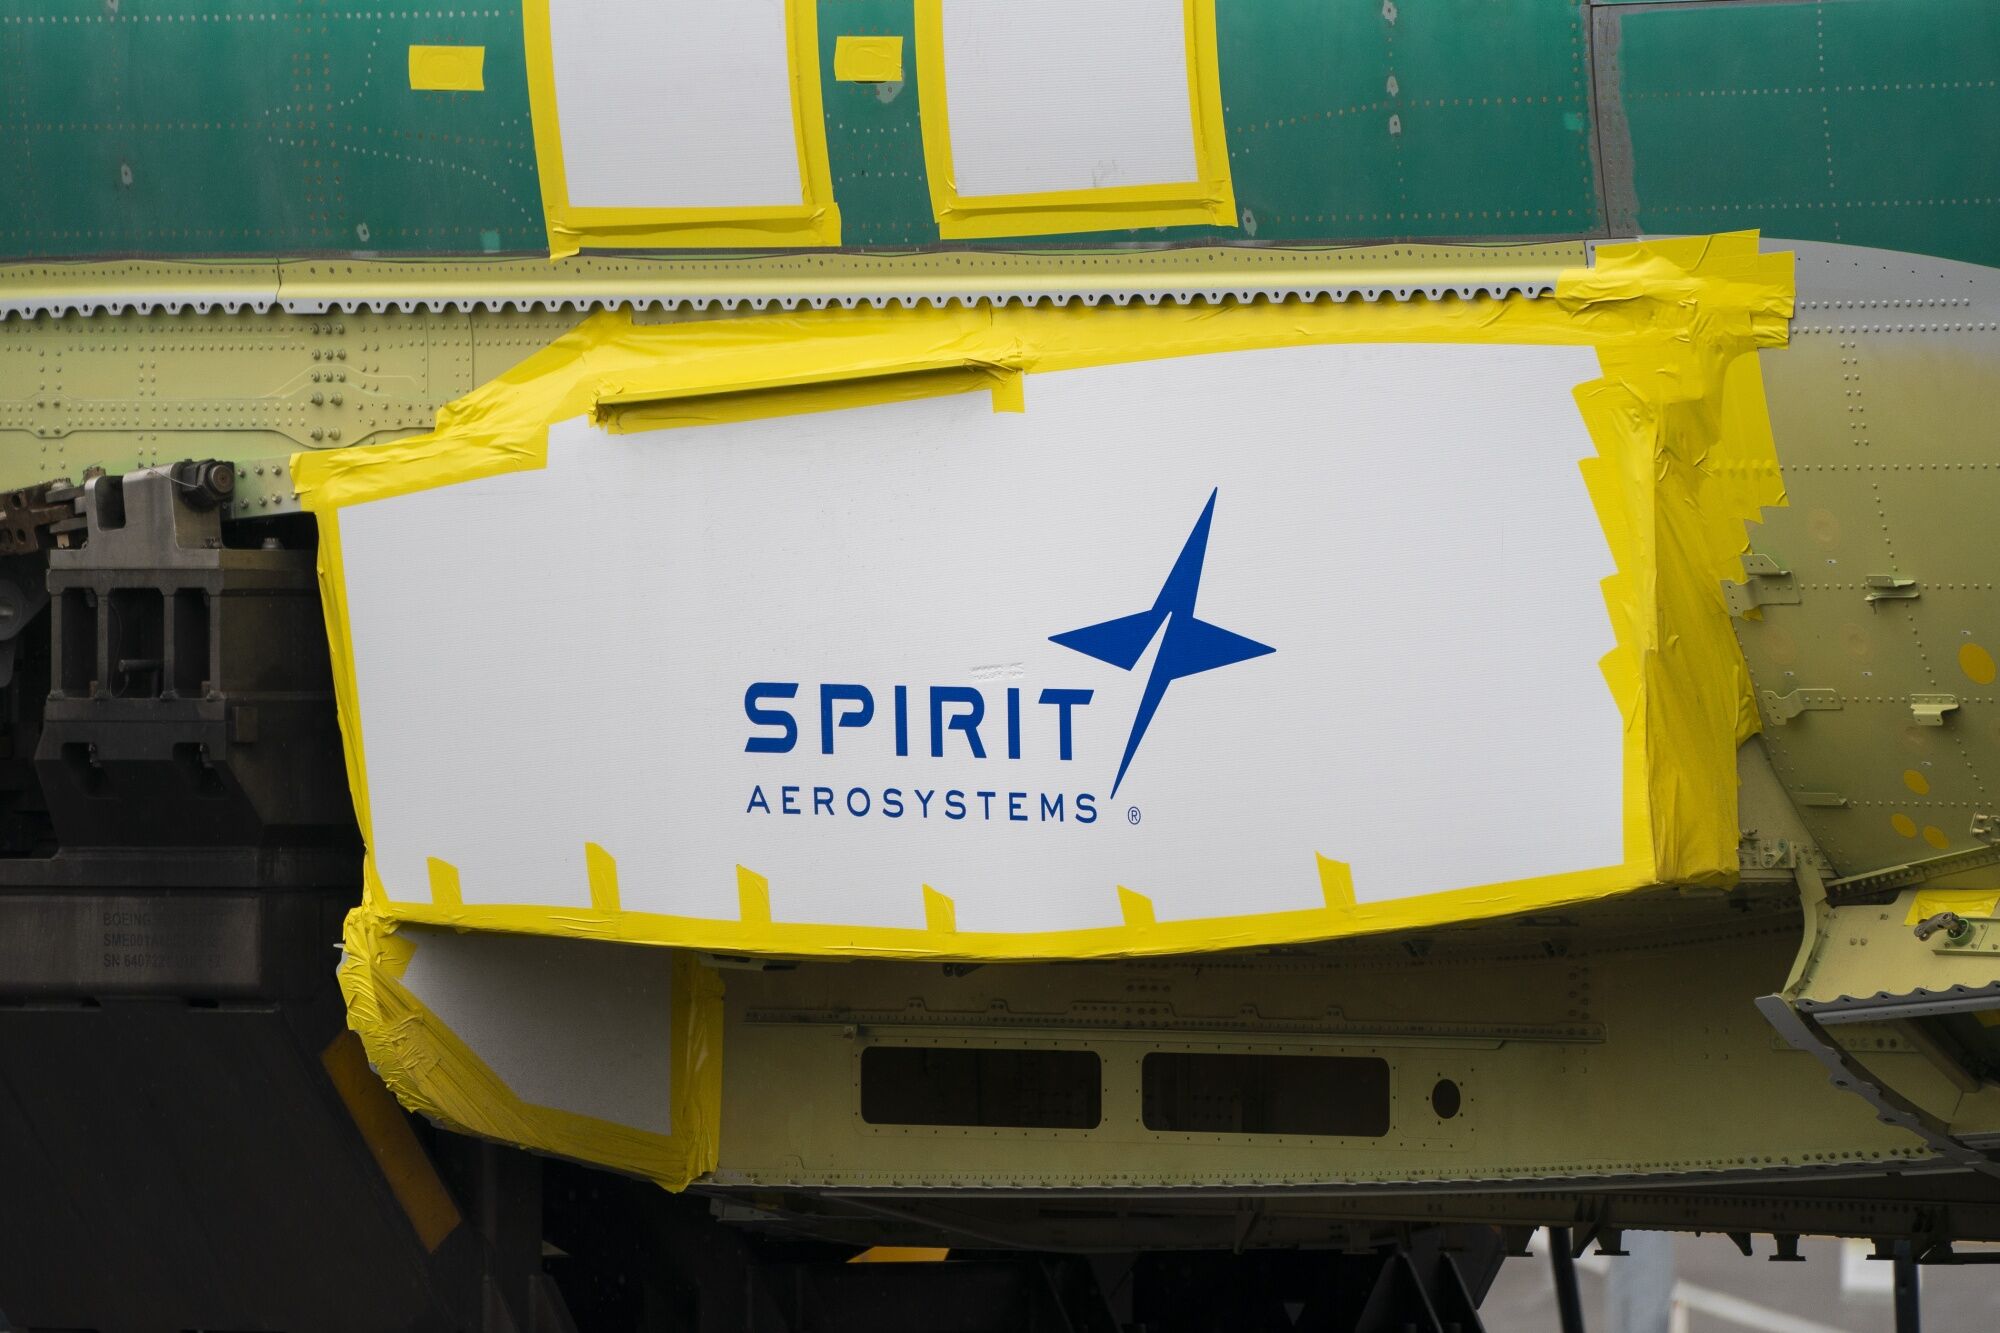 boeing bets big on spirit aero with 737, reputation on the line